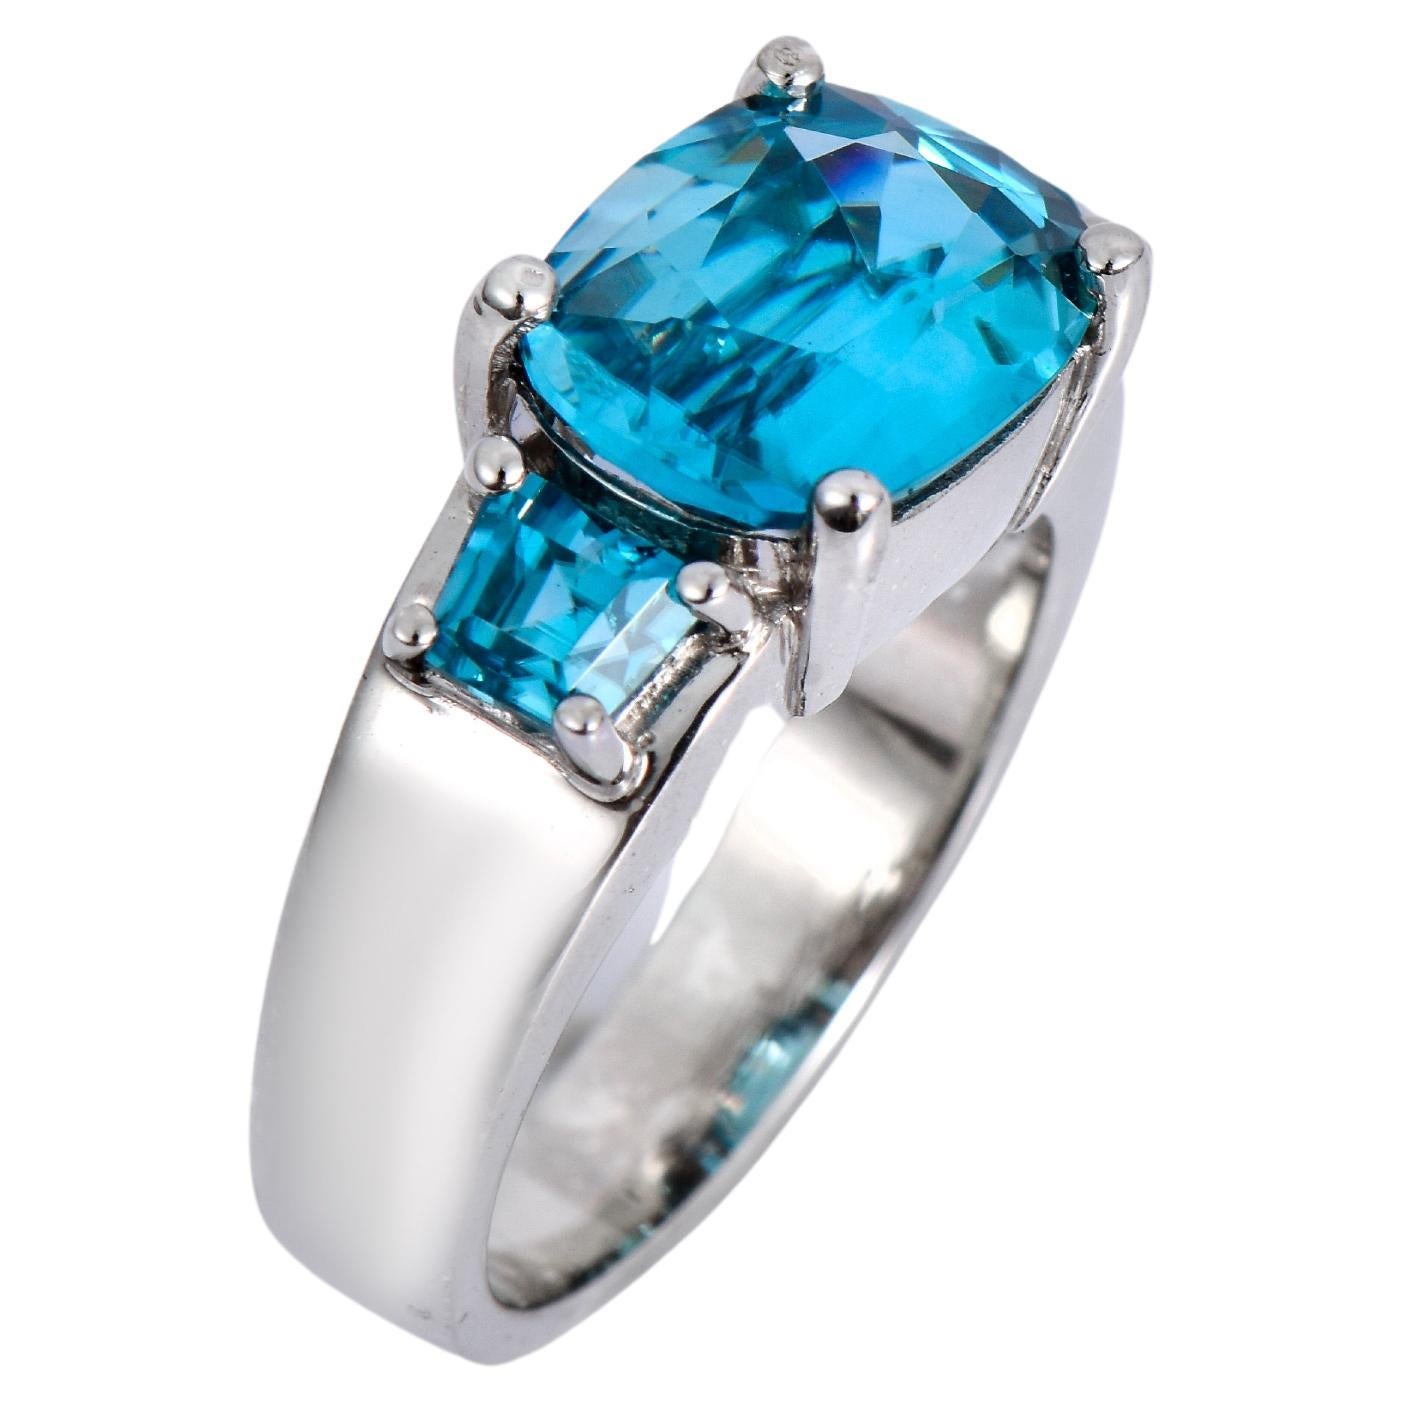 Orloff of Denmark, 8.27 ct Natural Blue Zircon Ring in 925 Sterling Silver For Sale